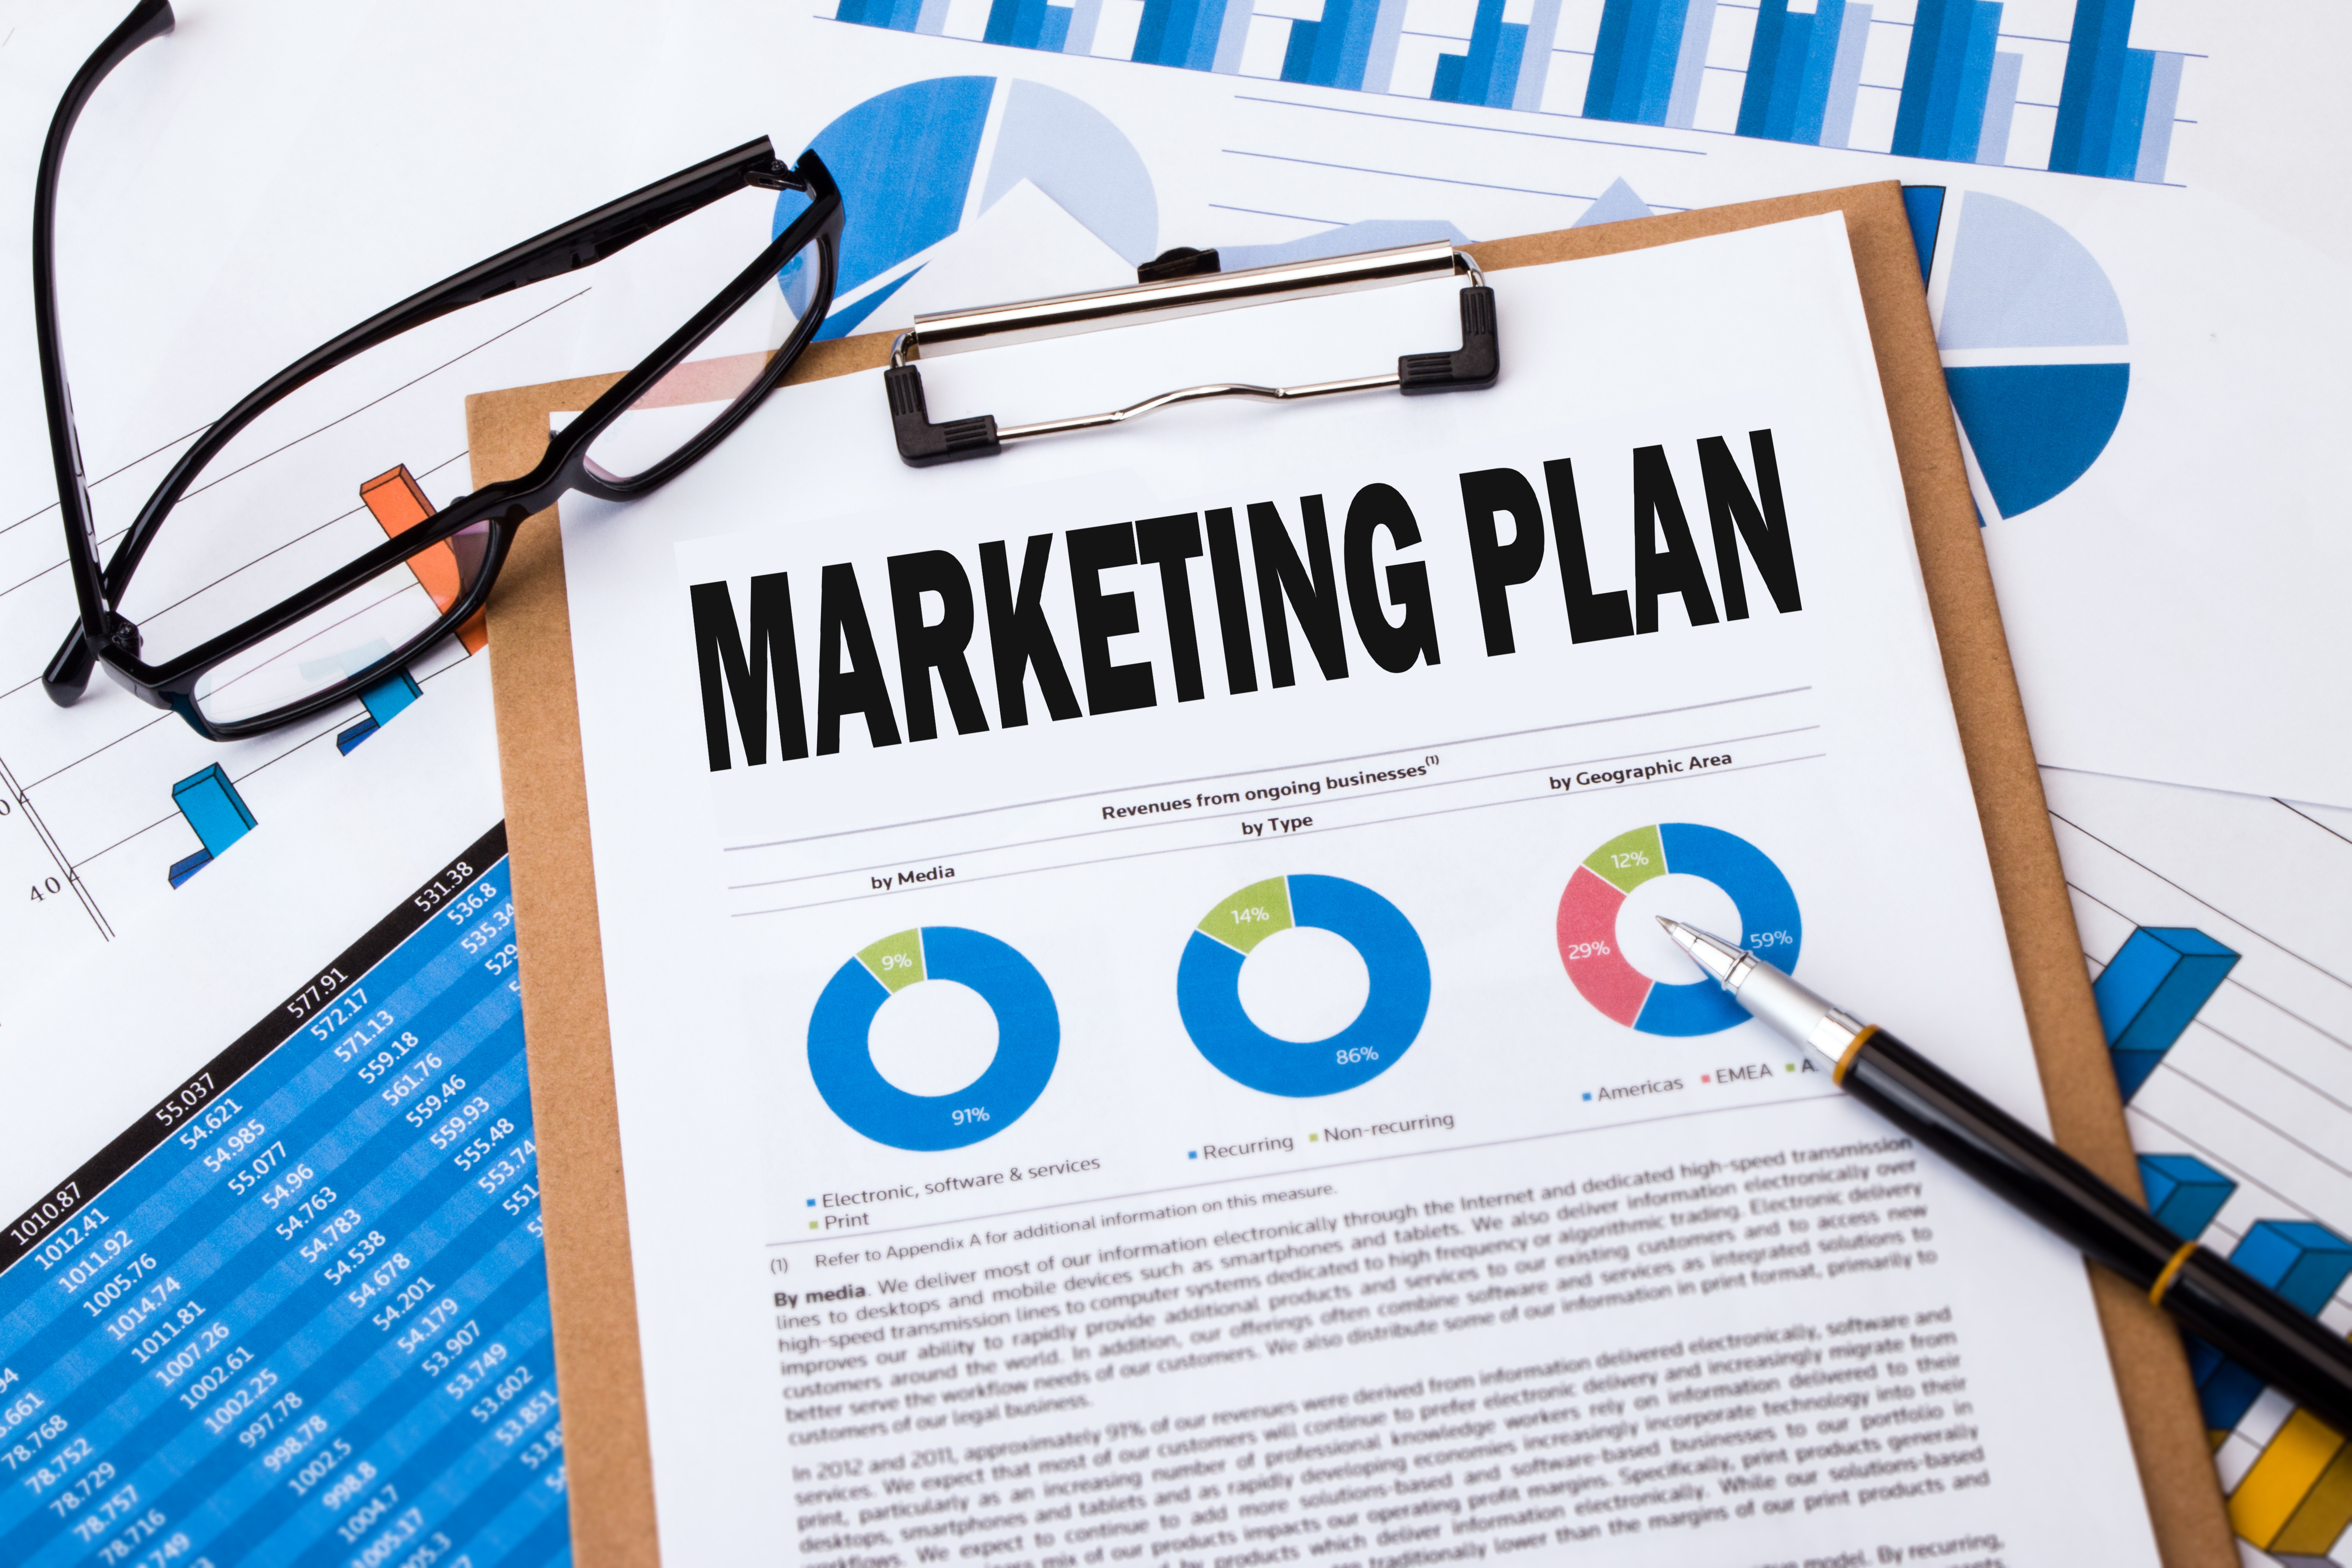 Marketing plan templates are a great place to start.